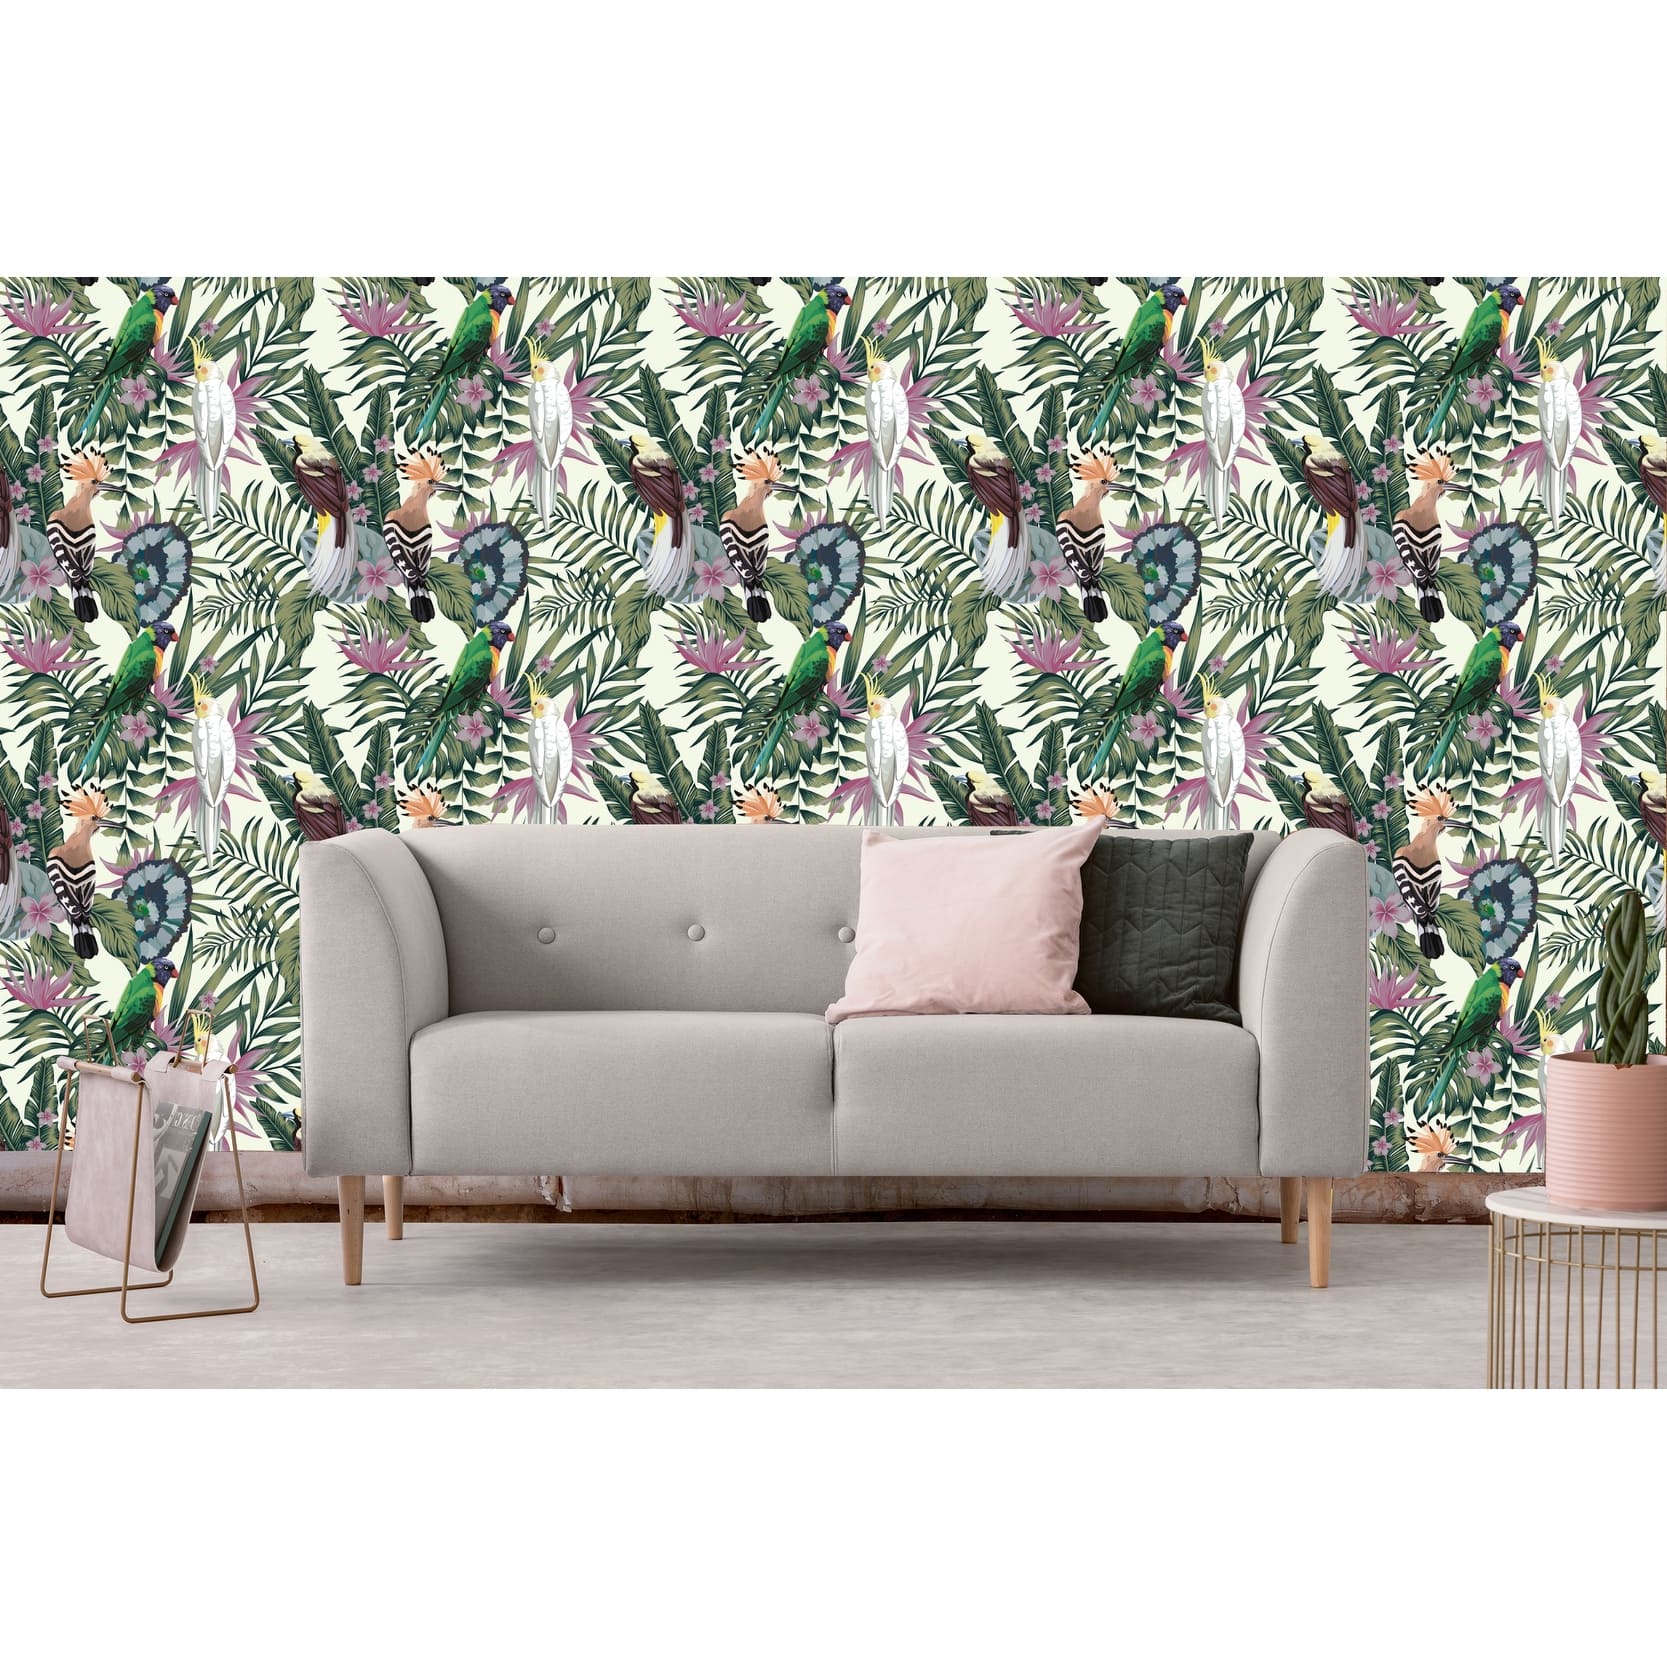 Bombai Tropical Flower Removable Wallpaper - 10'ft H x 24''inch W - Bed ...